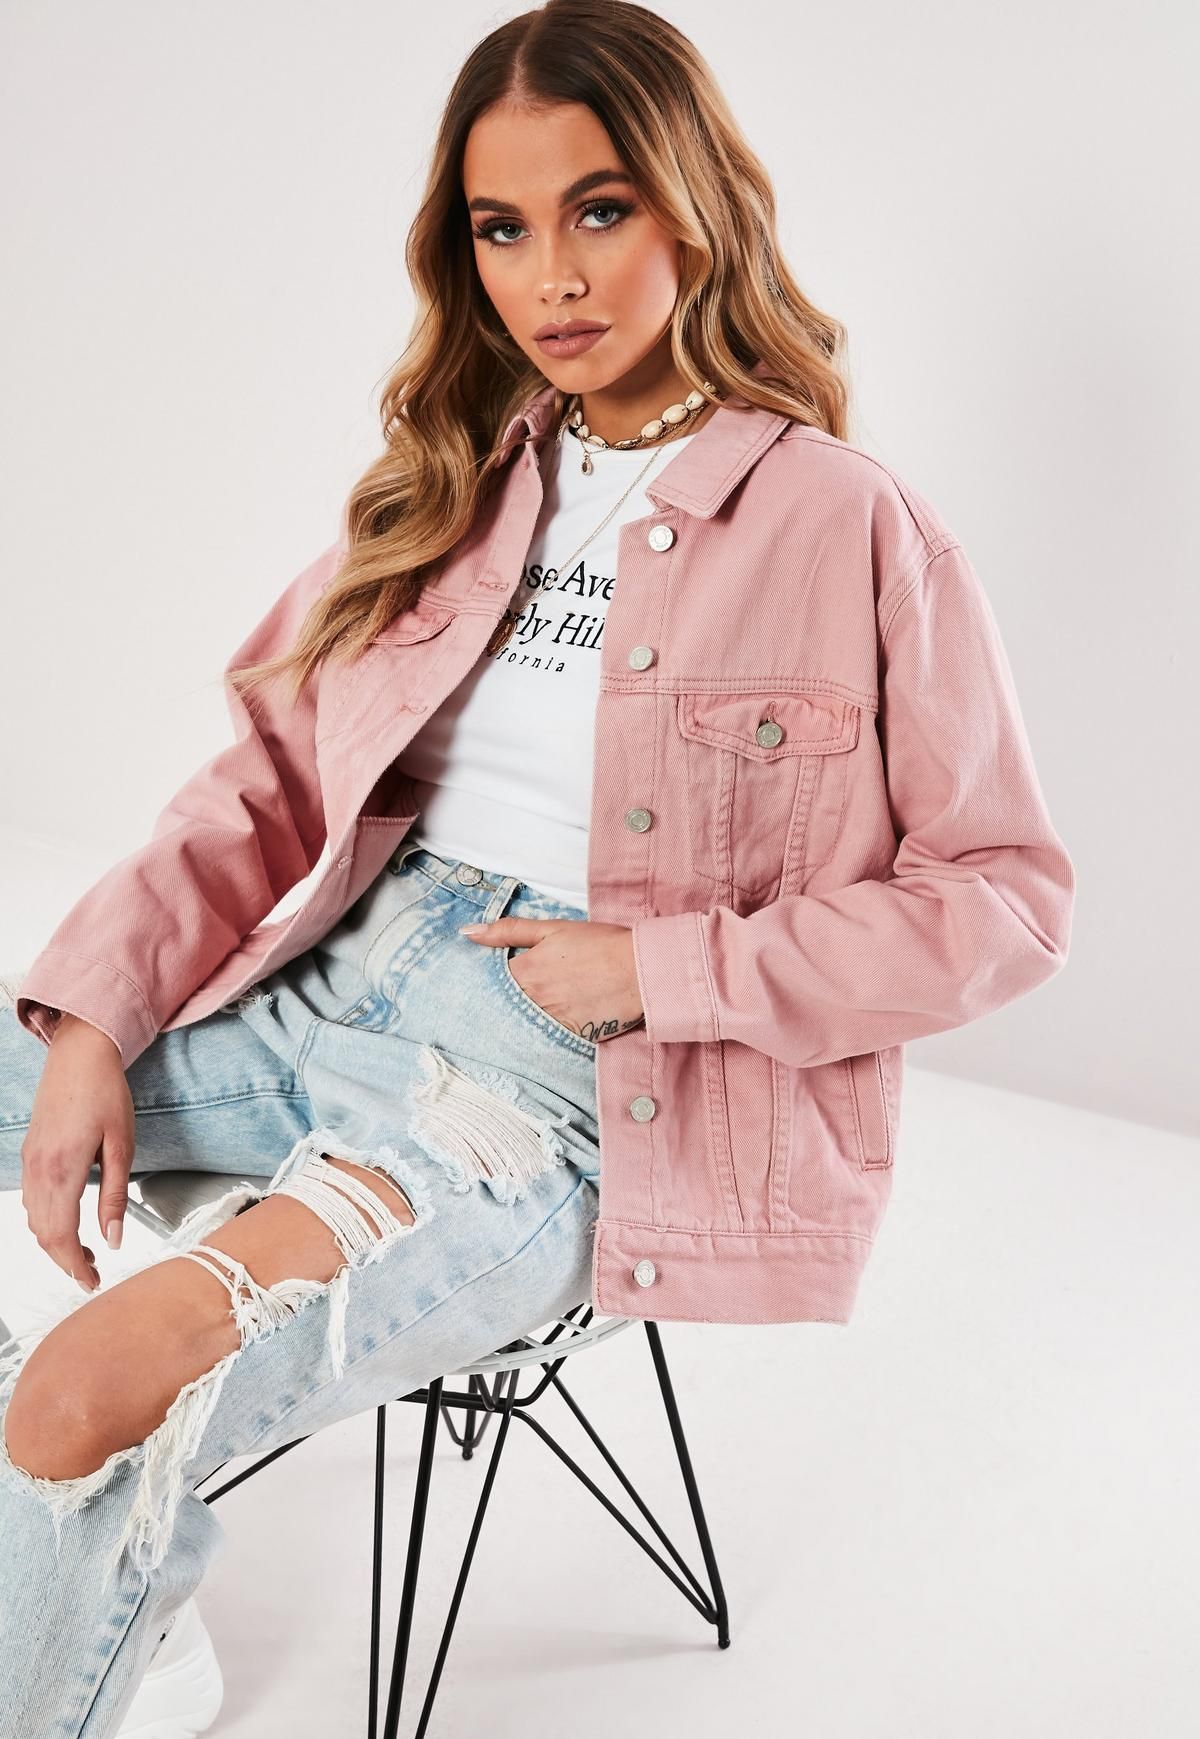 How To Style Pink Denim Jacket